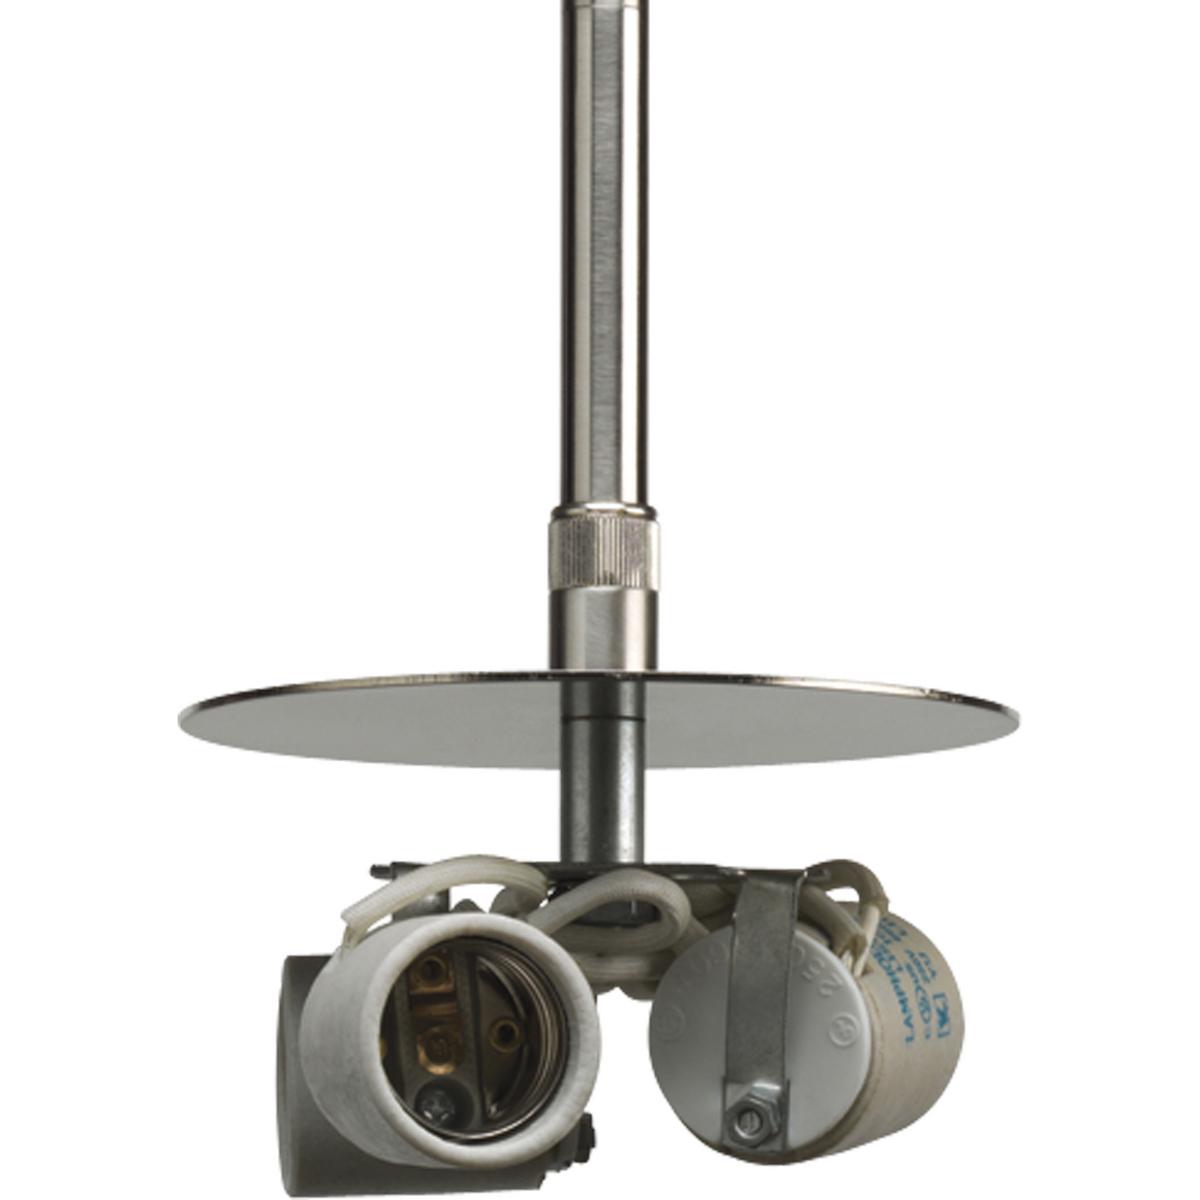 Hubbell P5199-09 The Markor Series is a modular pendant system. The versatile series allow the choice of shades and stem kits. This three-light stem mounted pendant for use with Markor Shades. Shades sold separately. This stem may be used with all Markor shades 16"-22" si